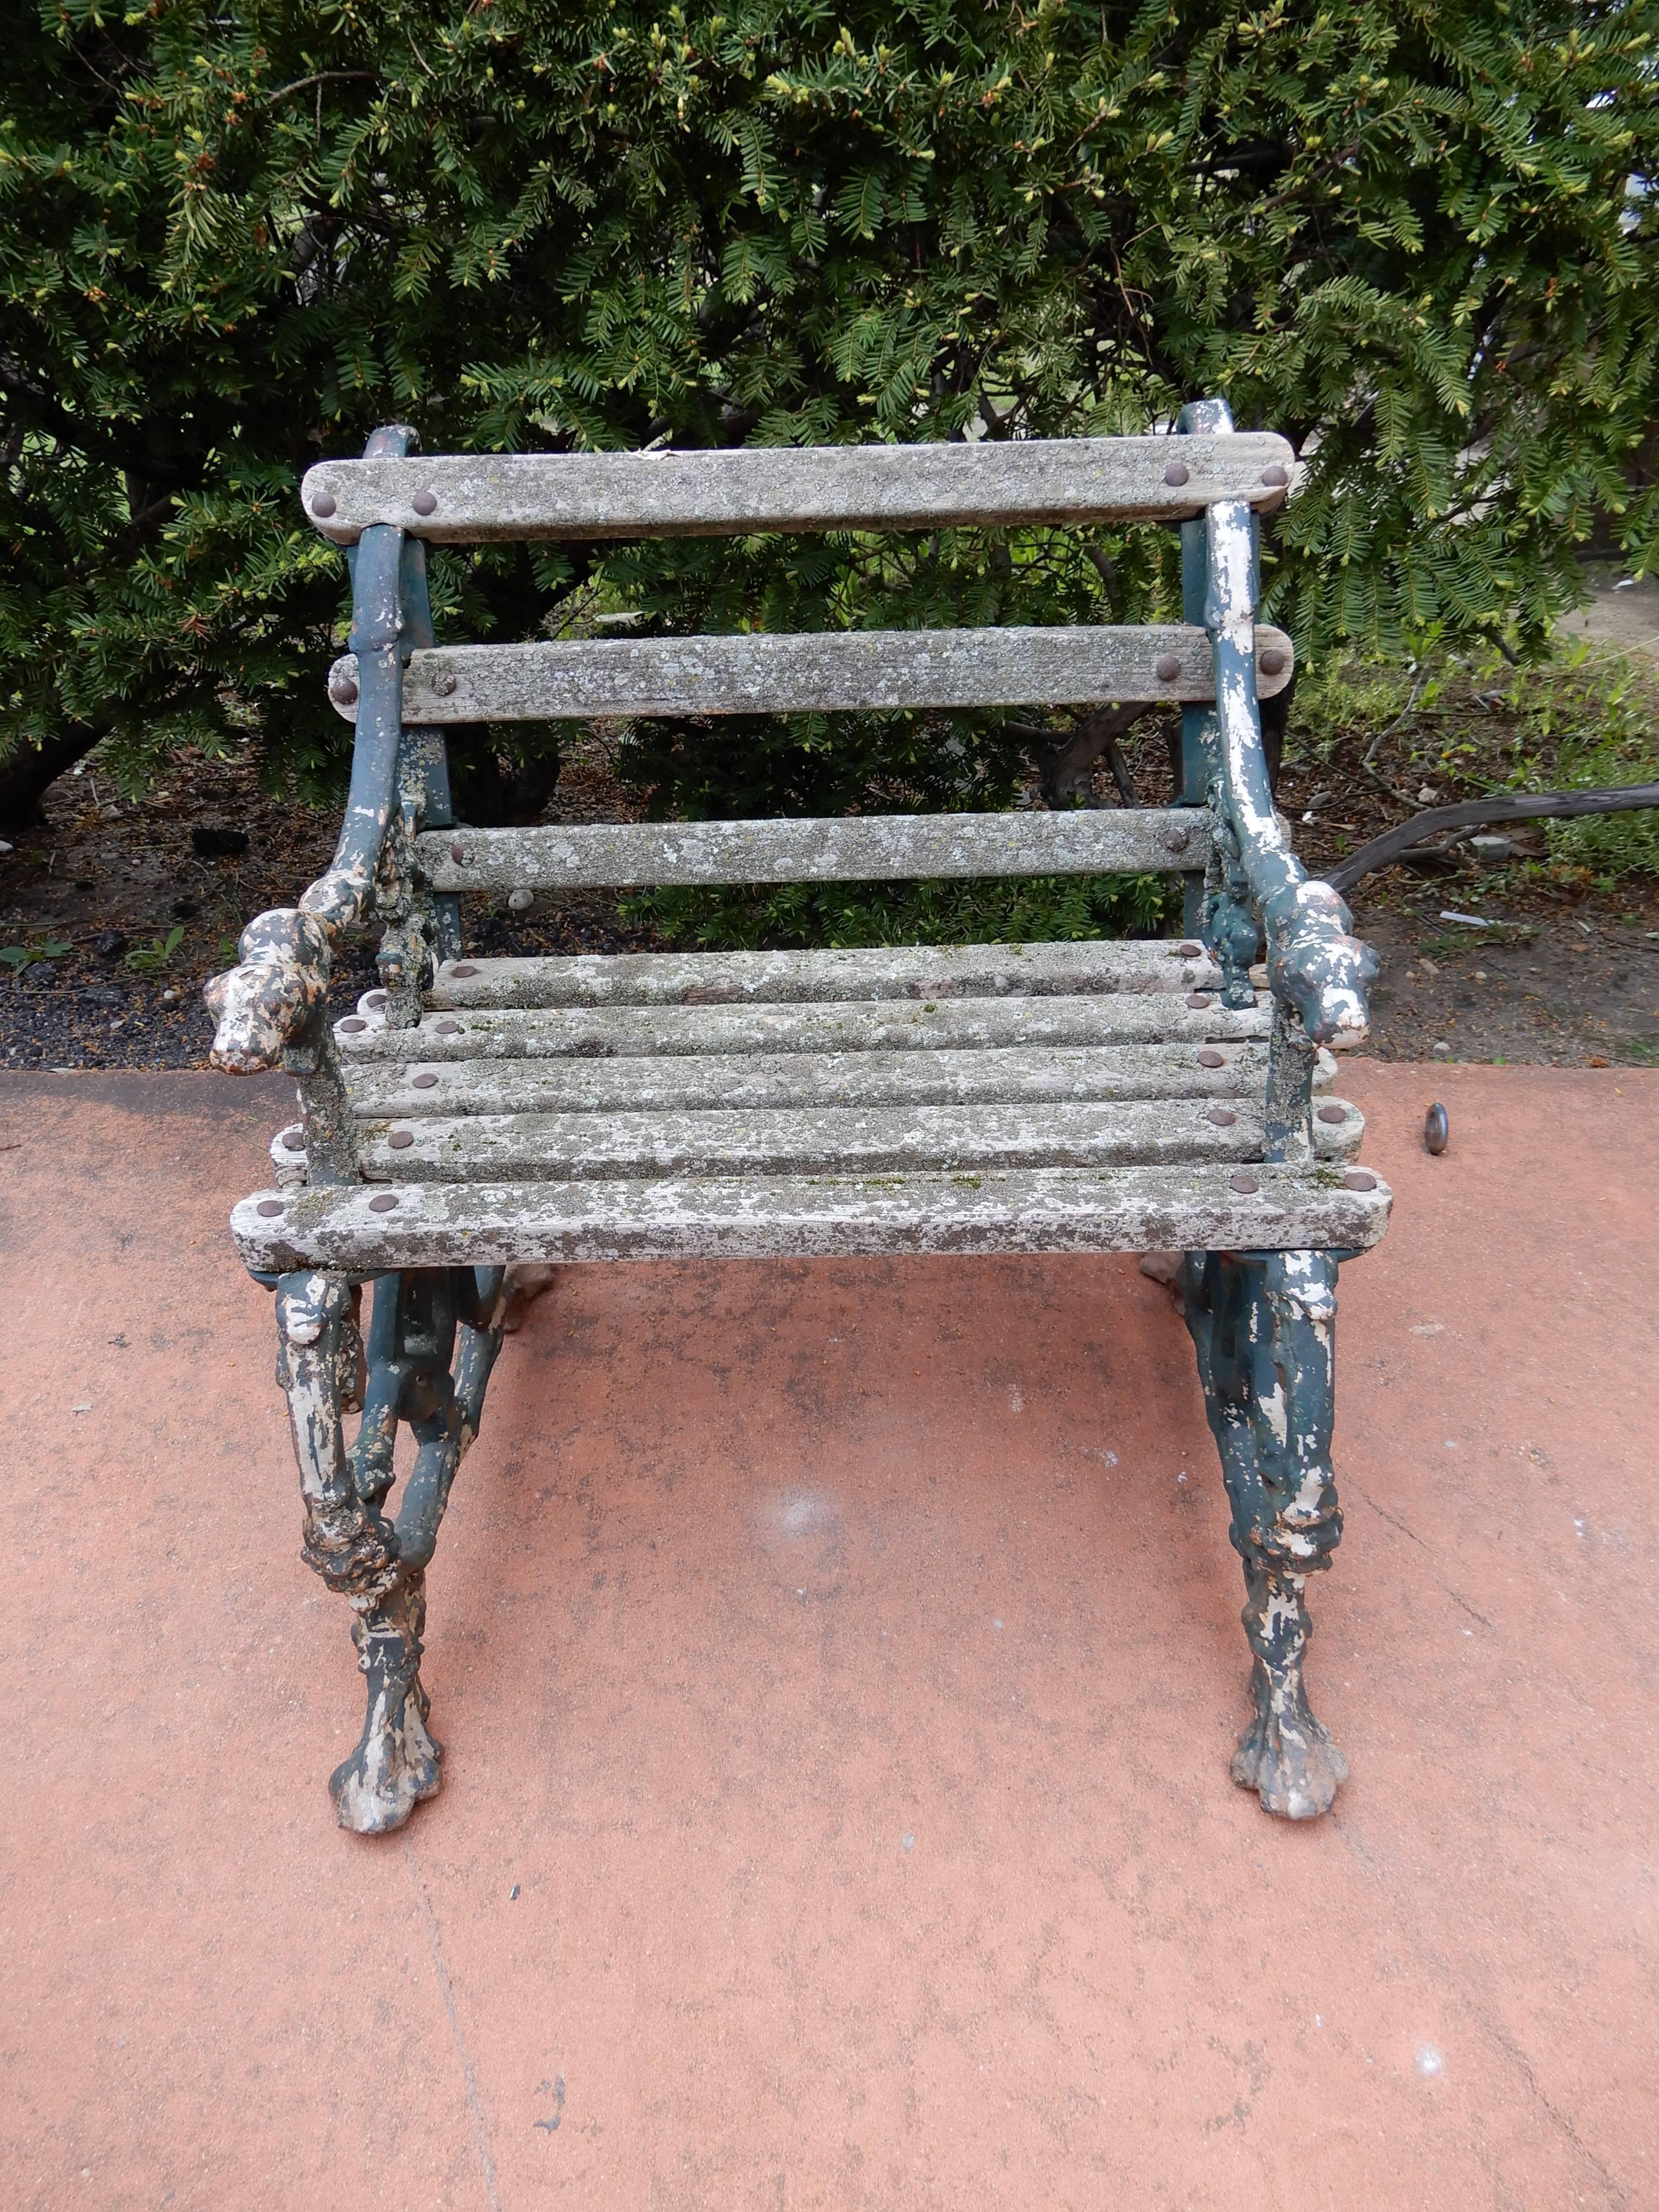 A late 19th century cast iron and wood seat garden chair by Coalbrookdale
The garden chair maintains an old worn painted finish on the cast iron a dark blue/black color. The motif of the desirable chair are the arms that terminate in dog heads, and